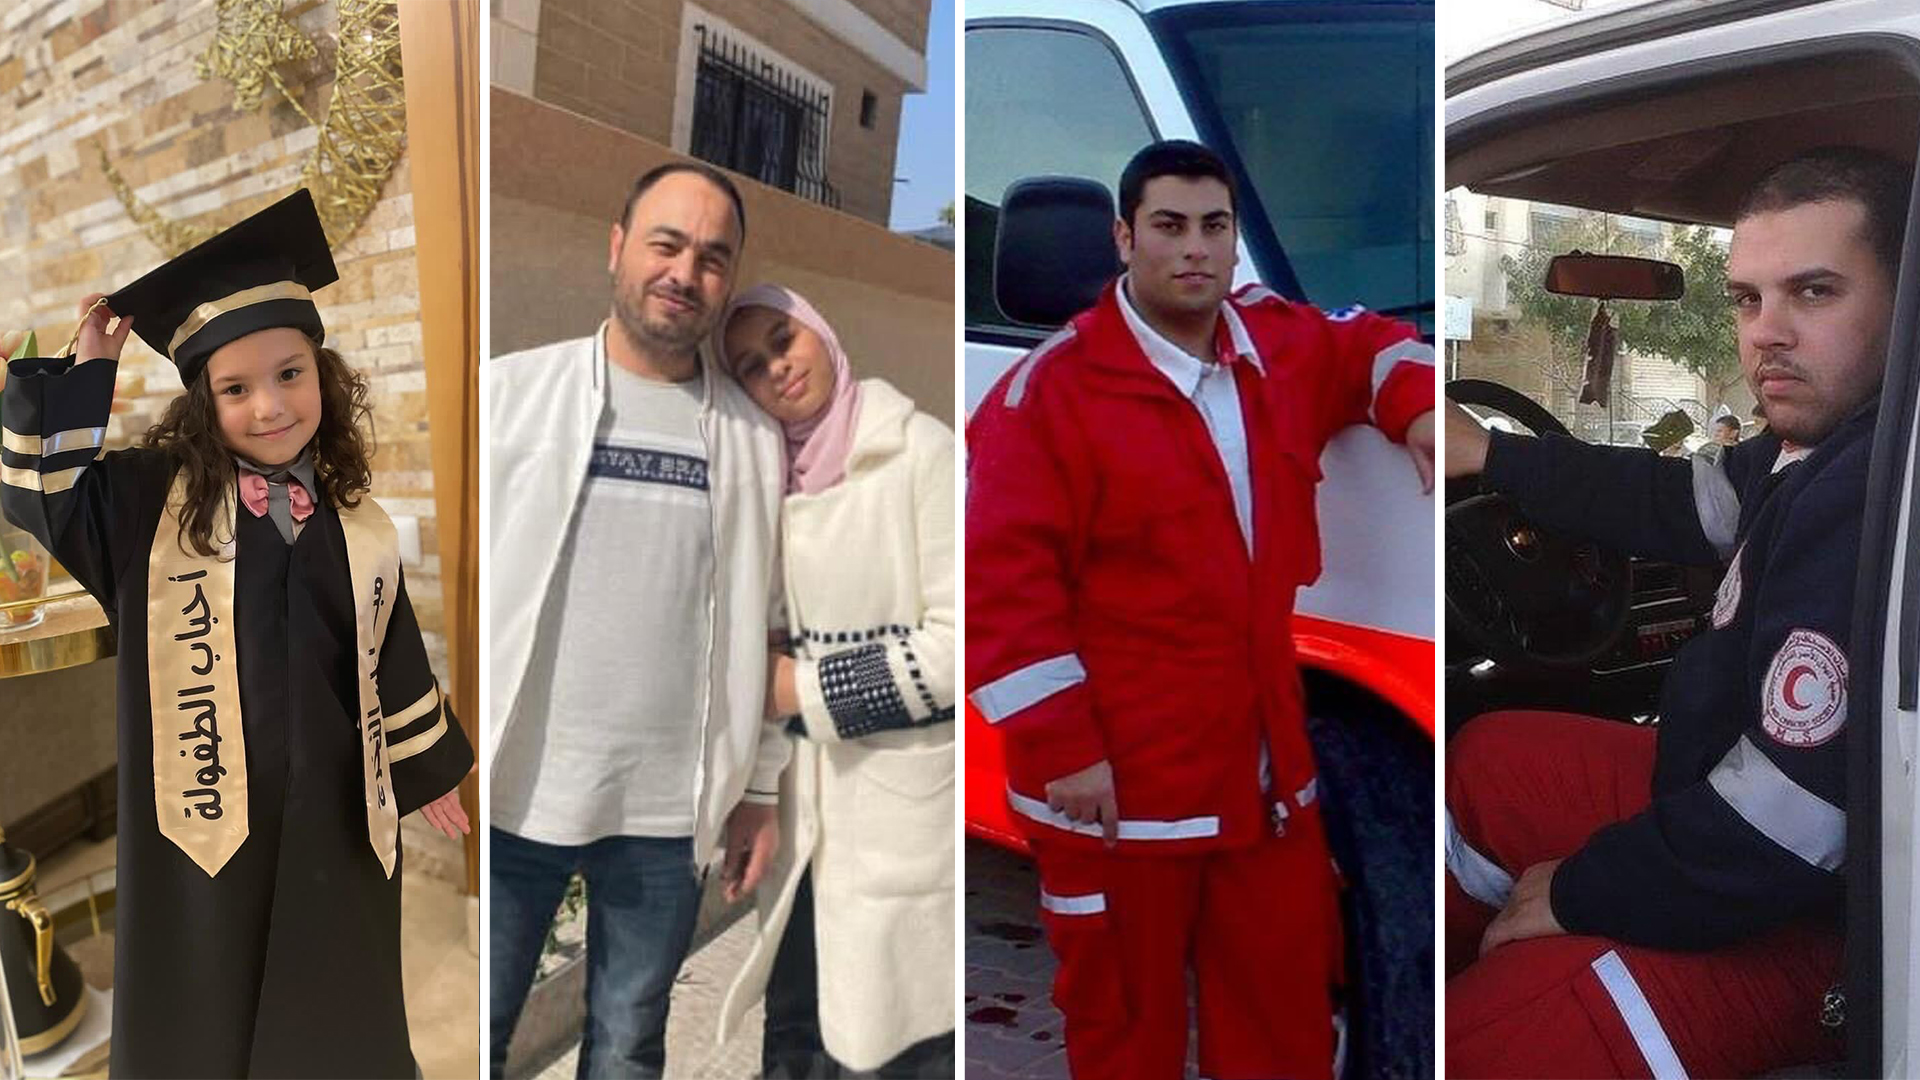 palestinian paramedics said israel gave them safe passage to save a 6-year-old girl in gaza. they were all killed.